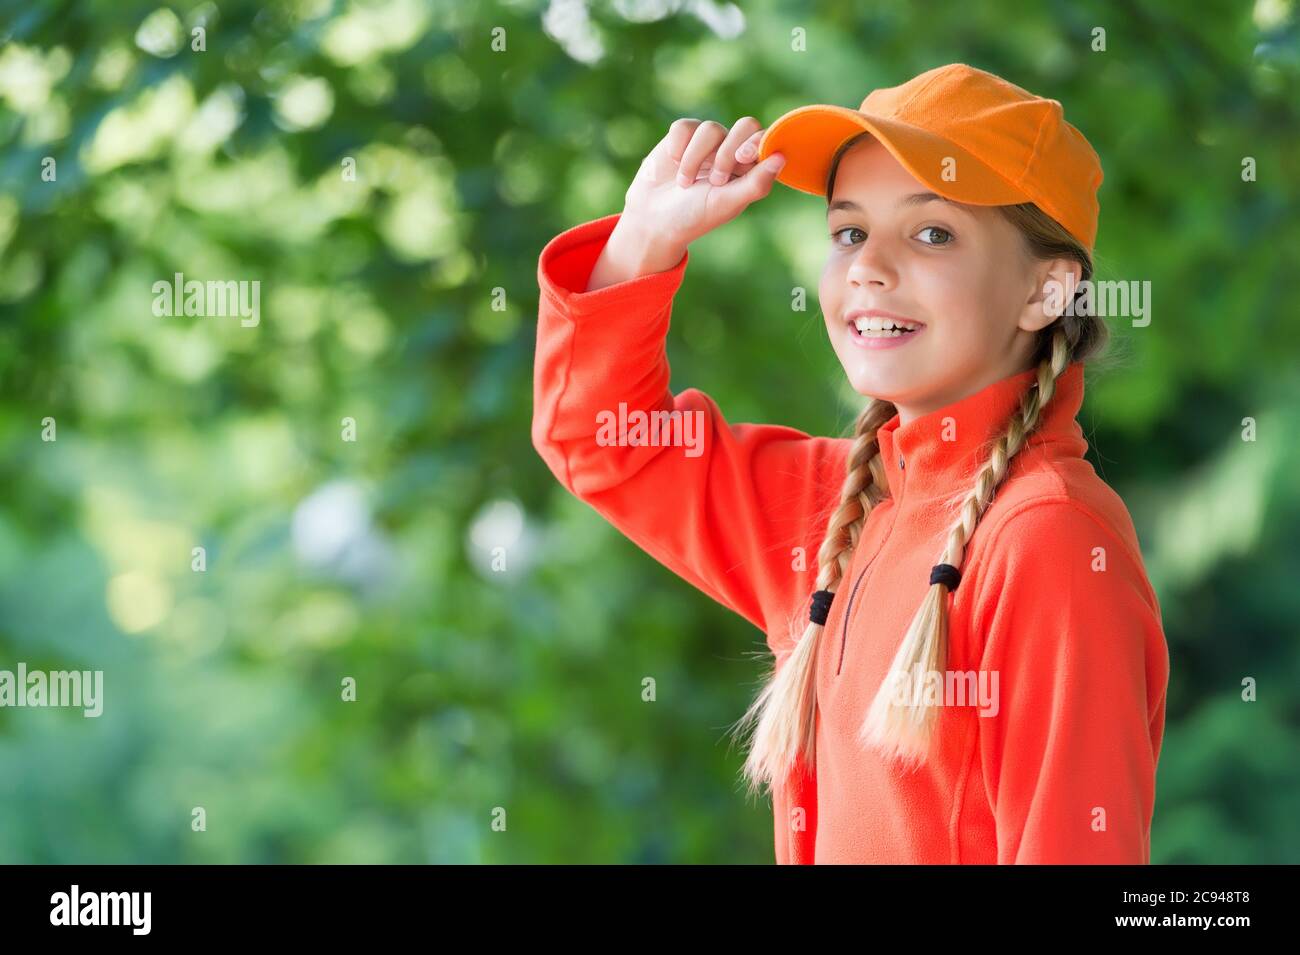 https://c8.alamy.com/comp/2C948T8/her-style-is-a-lot-more-casual-happy-child-in-casual-style-natural-outdoors-little-girl-wear-baseball-cap-casual-wardrobe-childrens-clothing-summer-fashion-trendy-everyday-clothes-copy-space-2C948T8.jpg